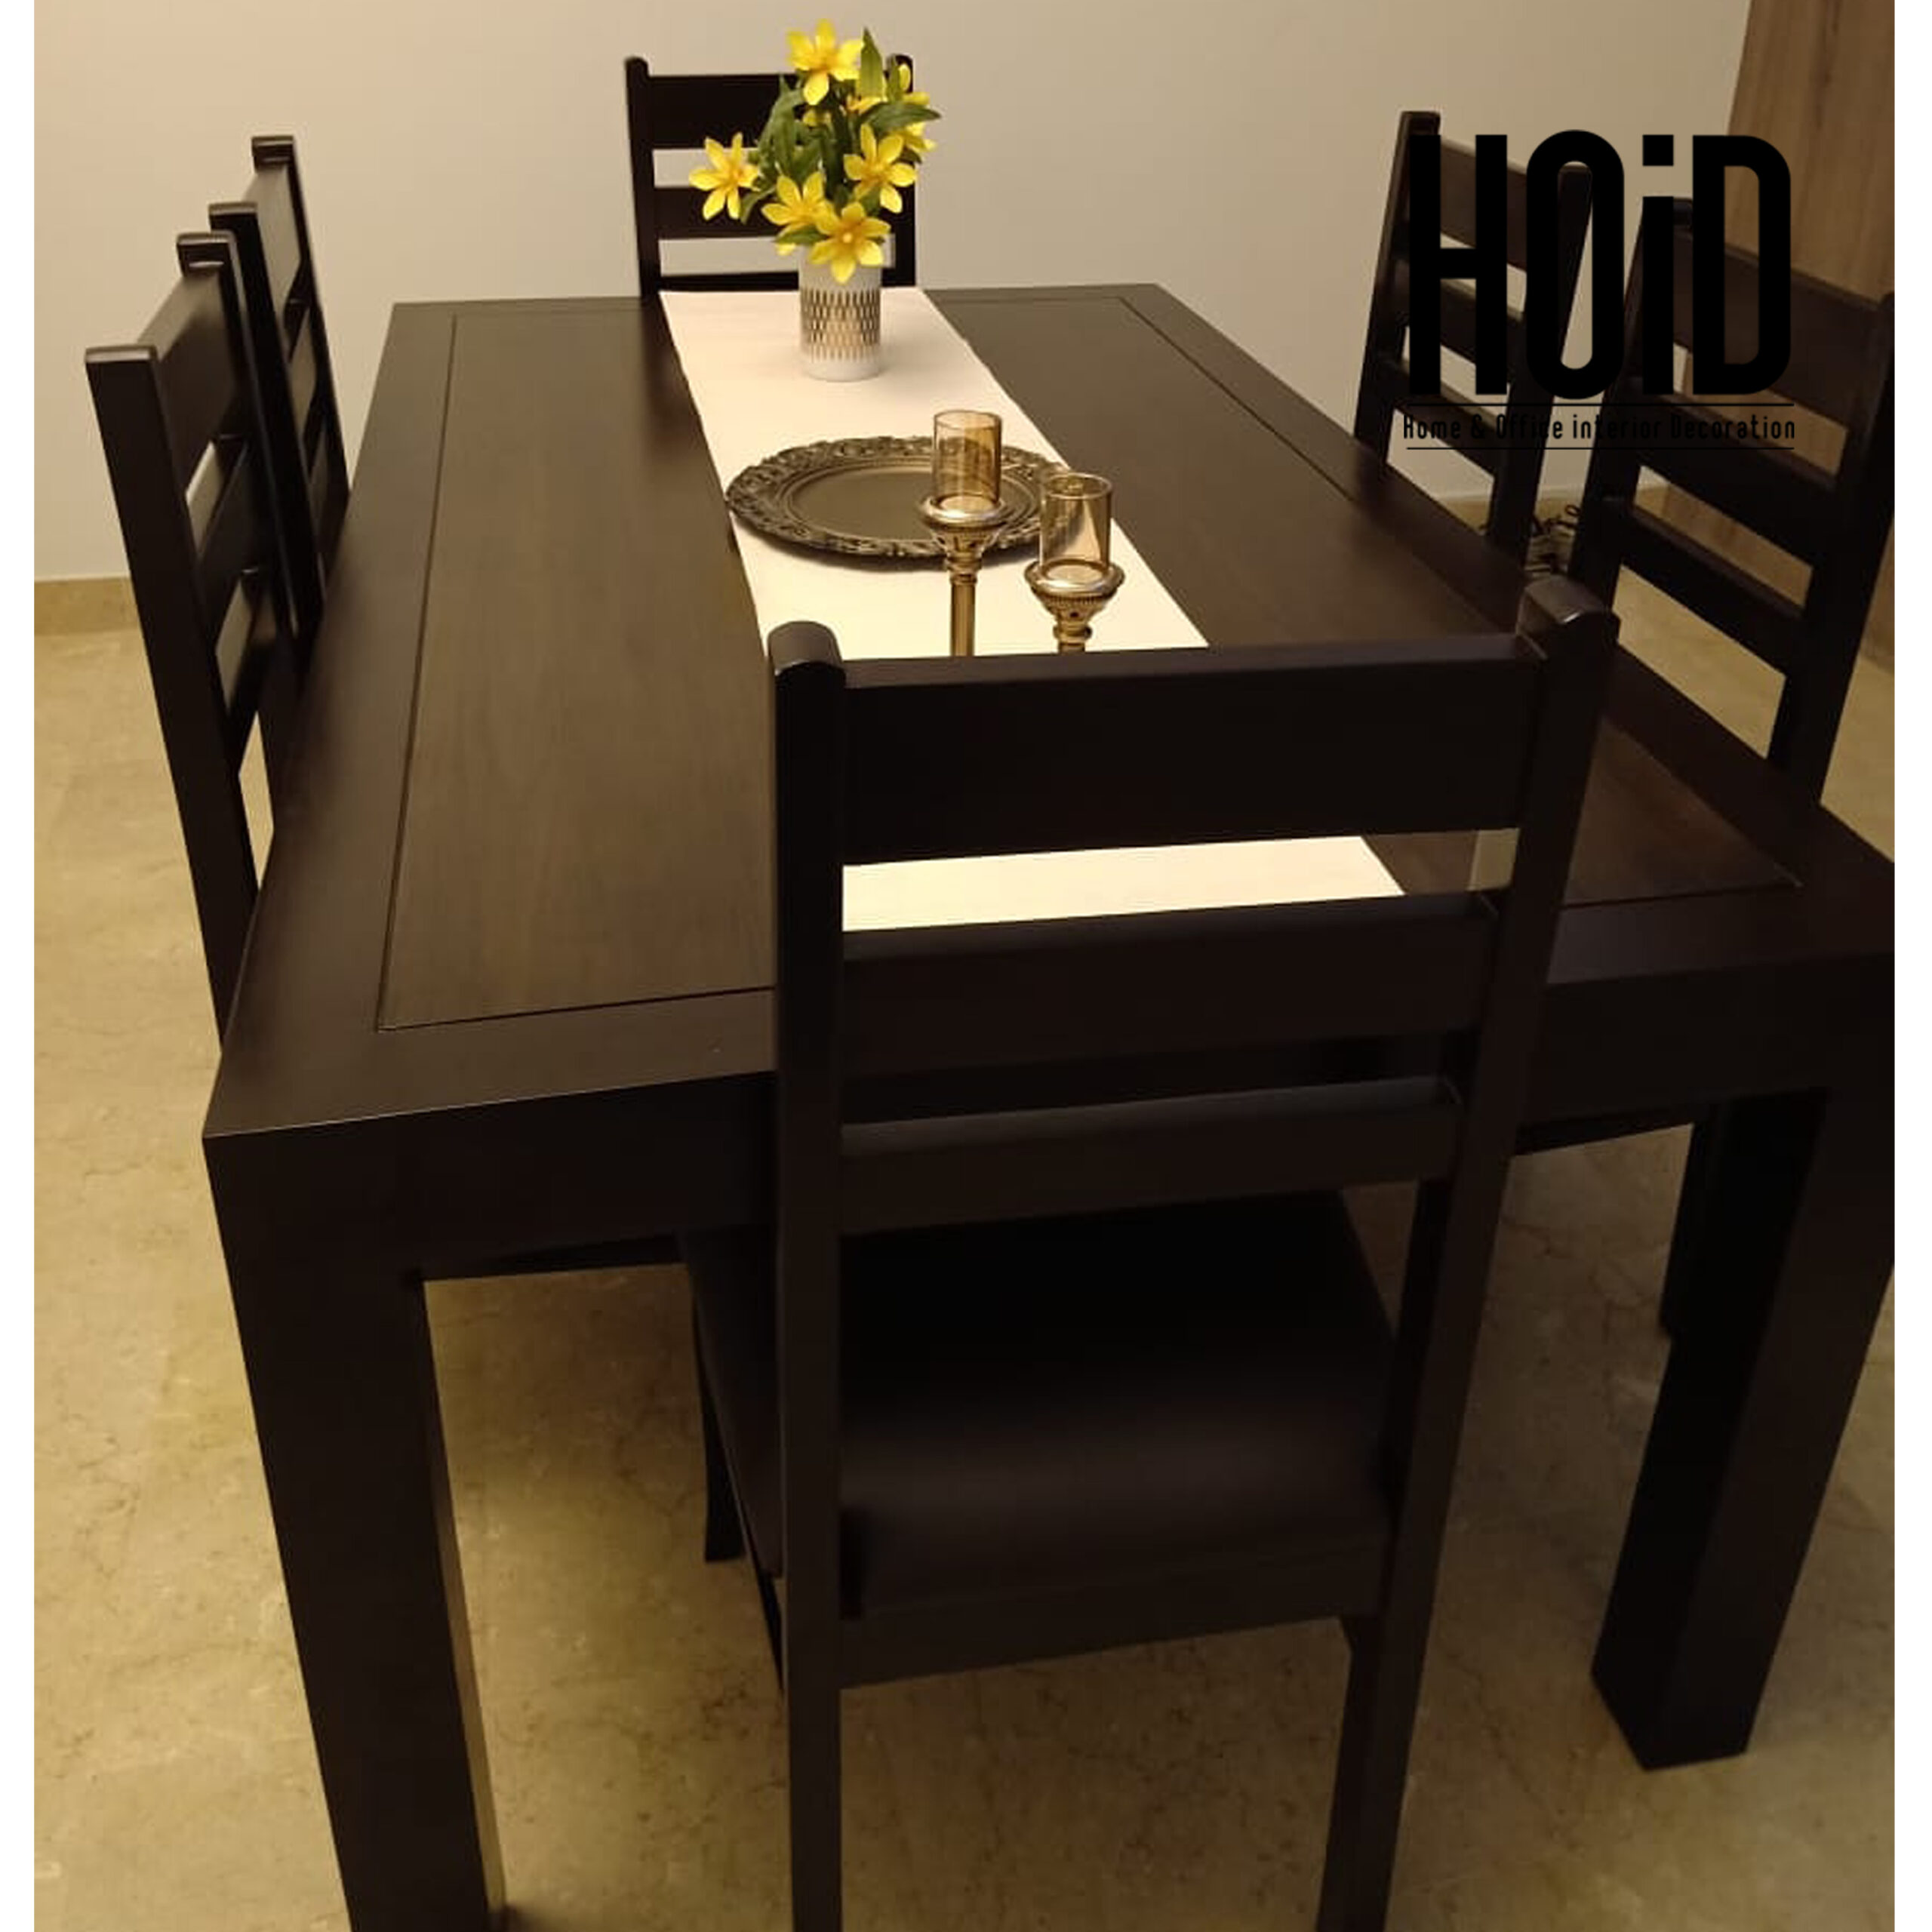 6 Seater Dining Table With Chairs, Wooden Dining Room Table And 6 Chairs